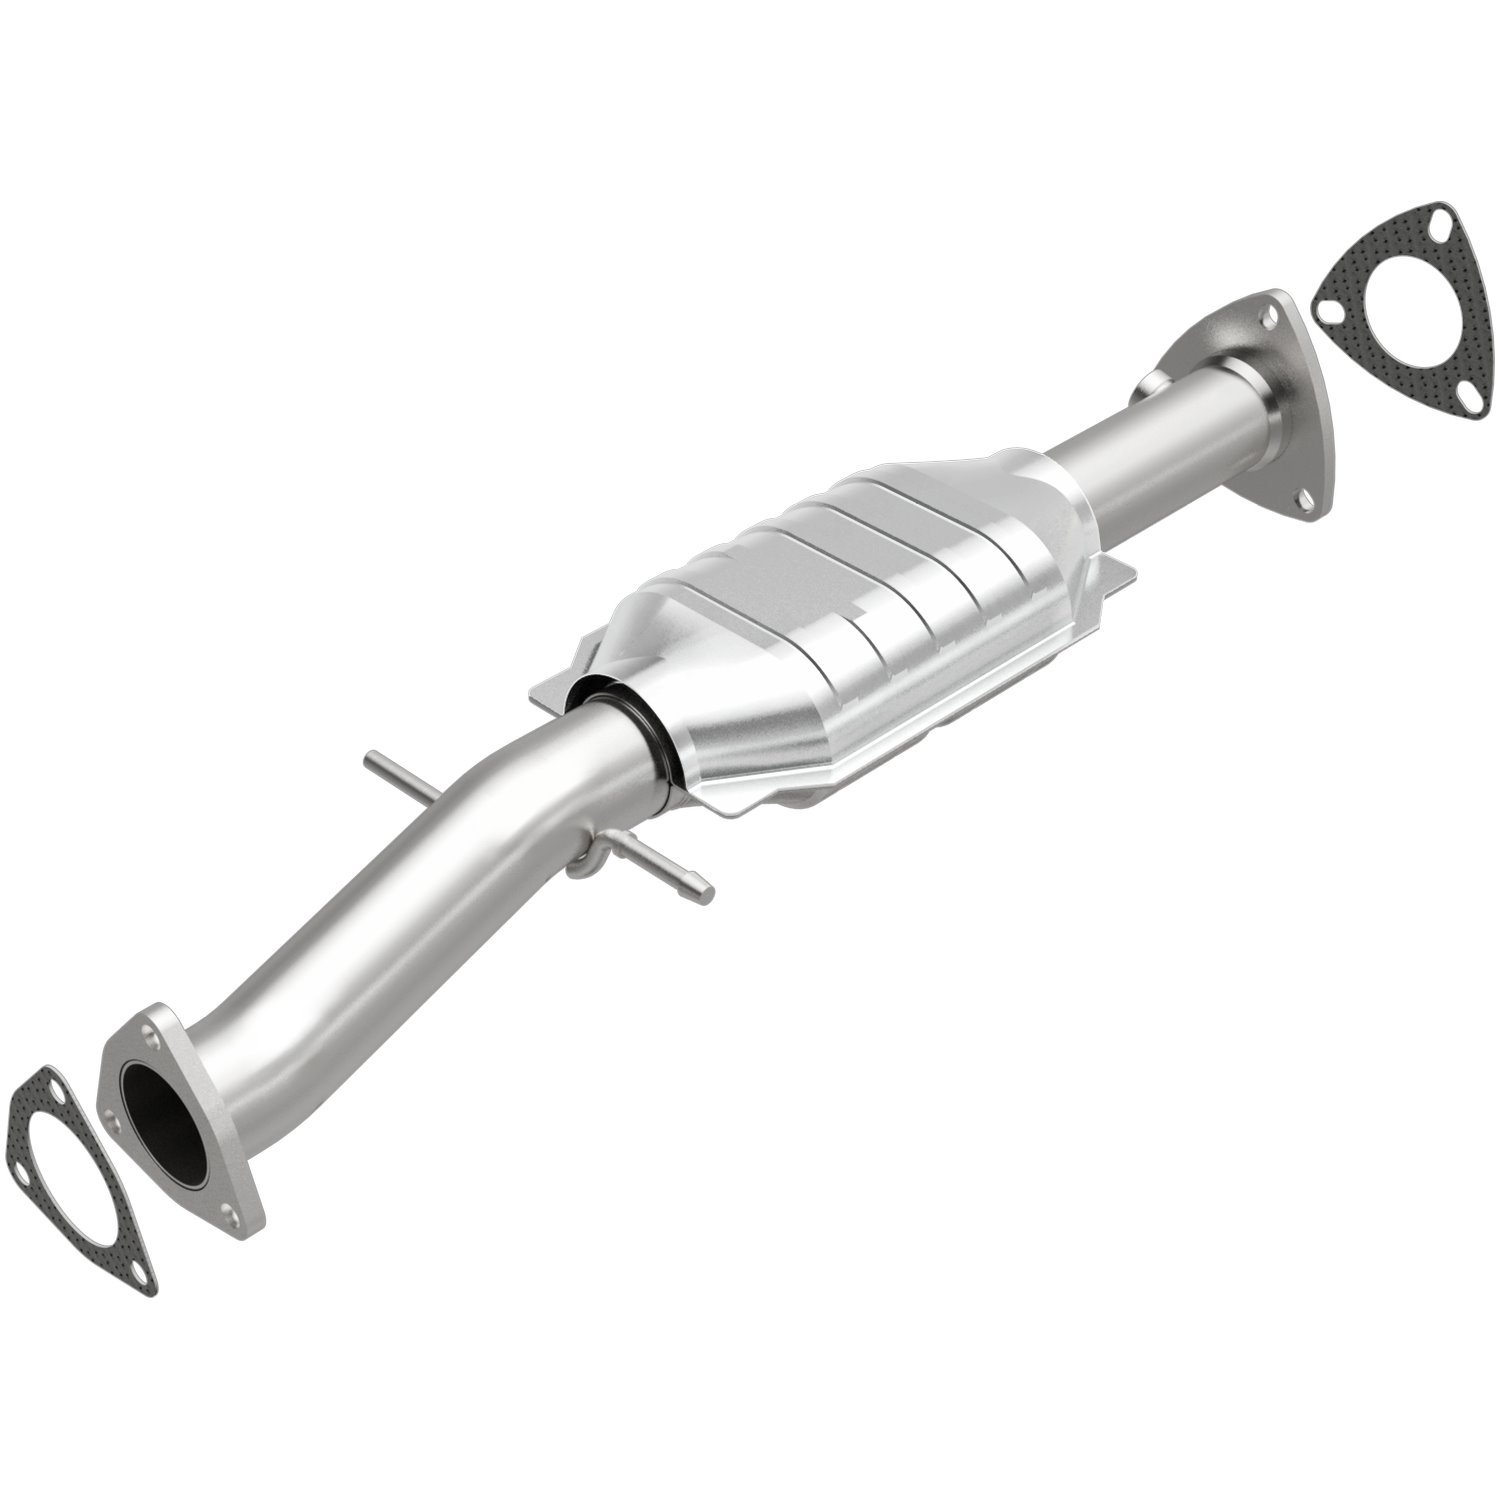 Direct-Fit Catalytic Converter 1998-99 Chevy S10 & GMC Sonoma 2WD 4.3L